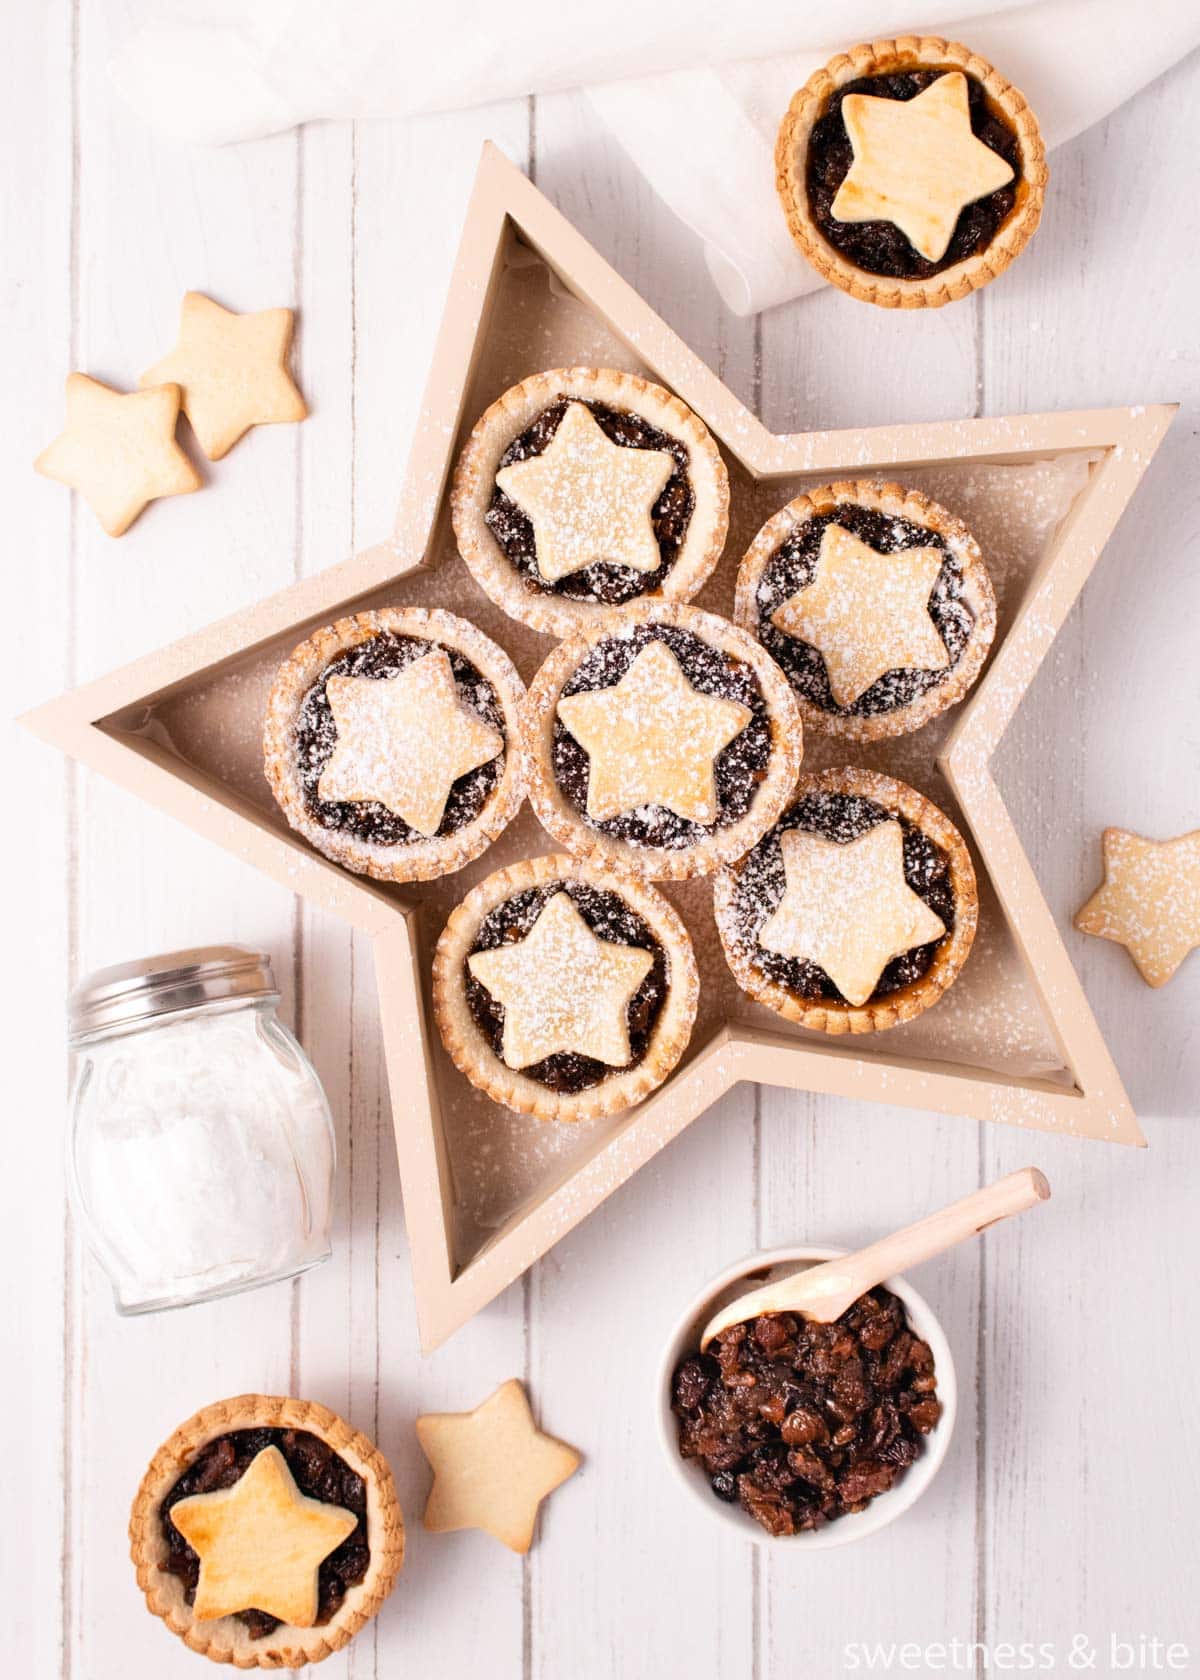 Gluten free mince pies served in a star-shaped wooden box, on a white wooden background, with a small bowl of fruit mince and shaker of icing sugar.